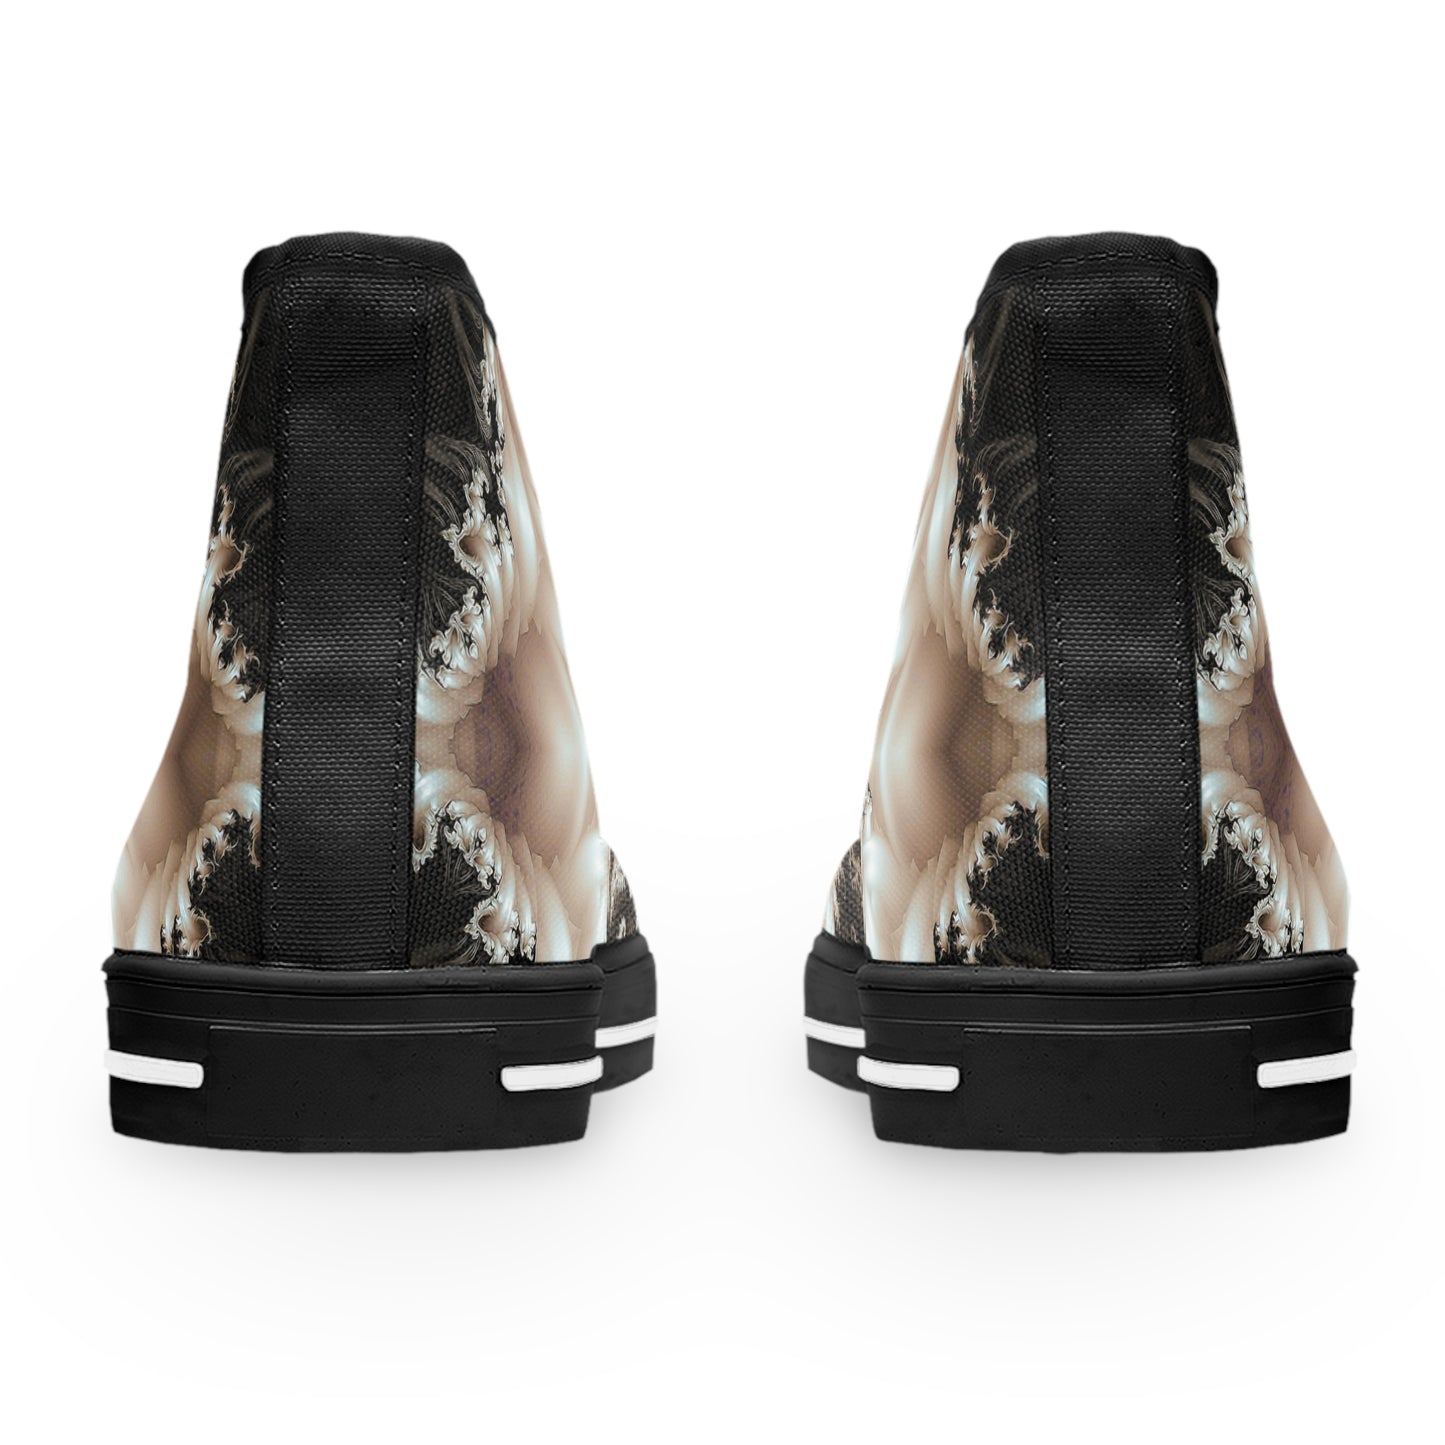 "Duality" WOMEN'S HIGHT TOP SNEAKERS